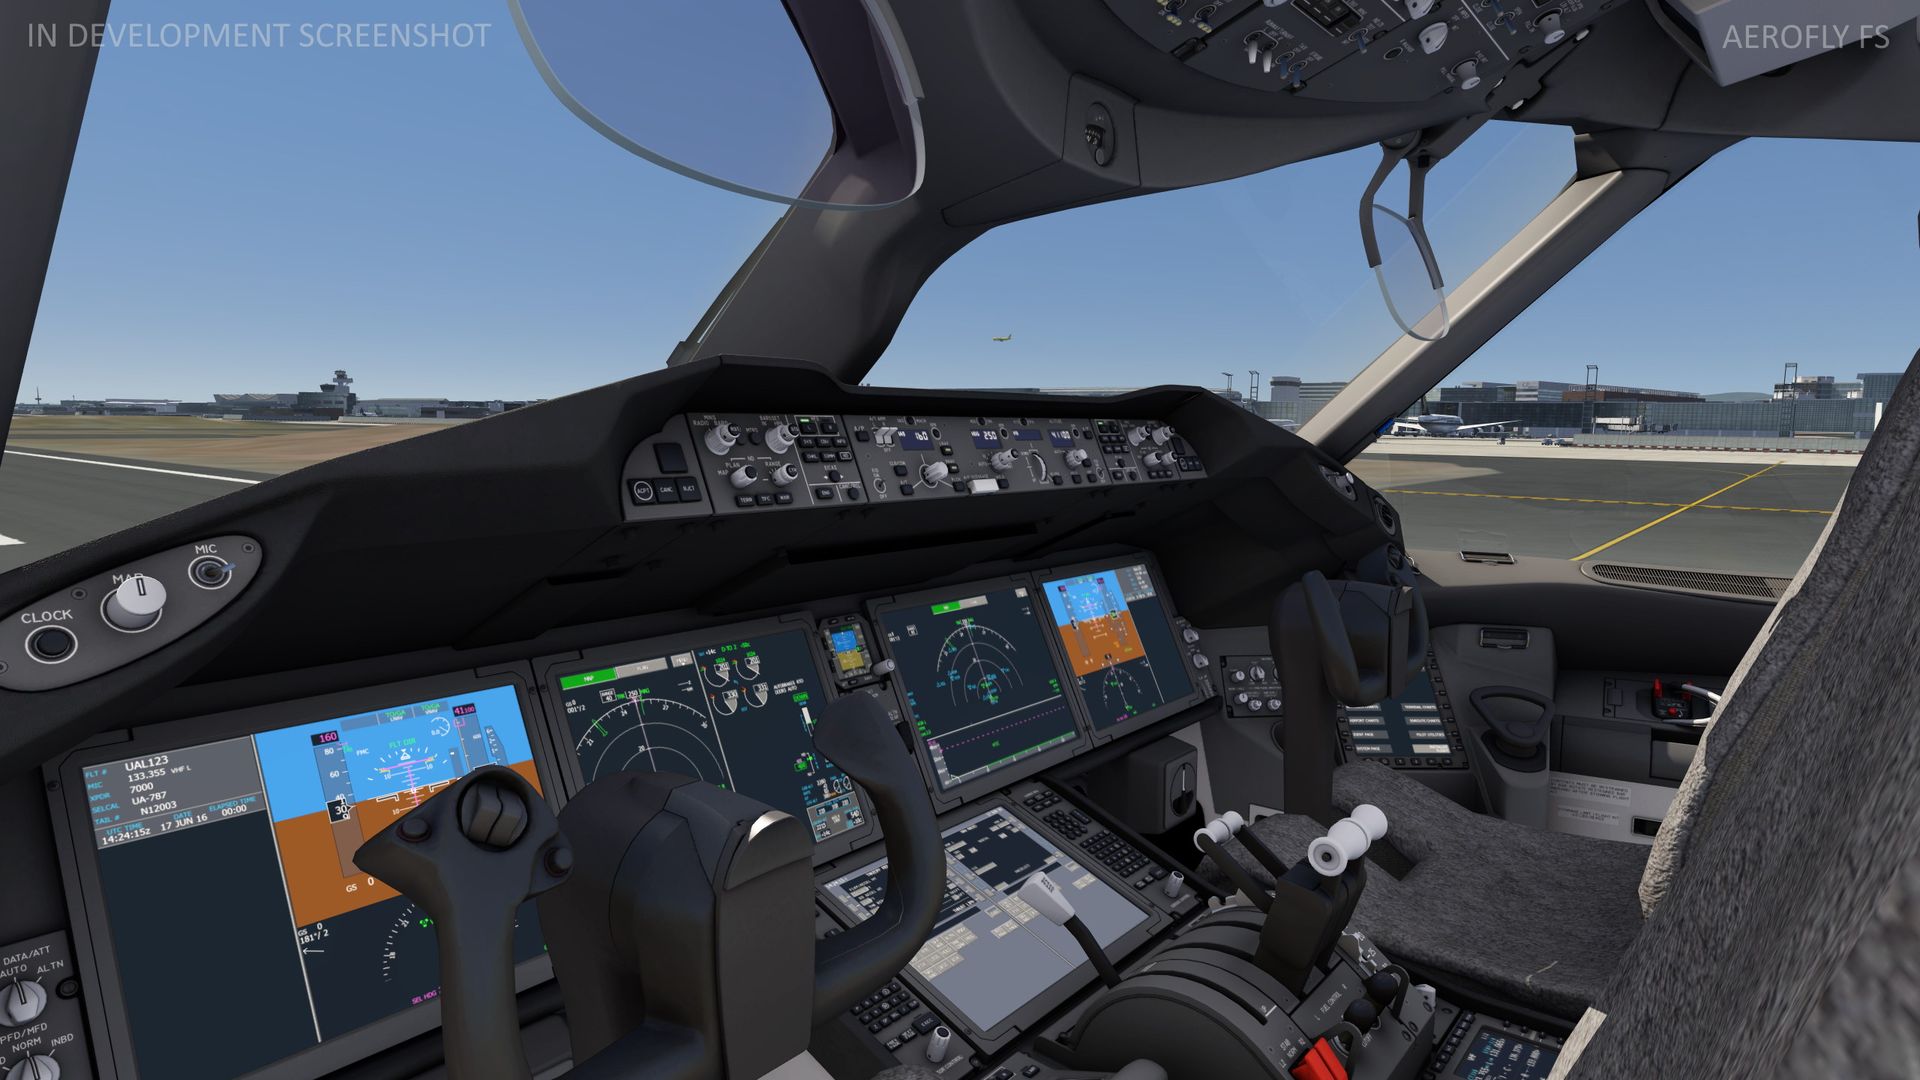 Aerofly FS 4 Desktop - Feature Overview And Screenshots - General discussions - IPACS Aerofly Forum